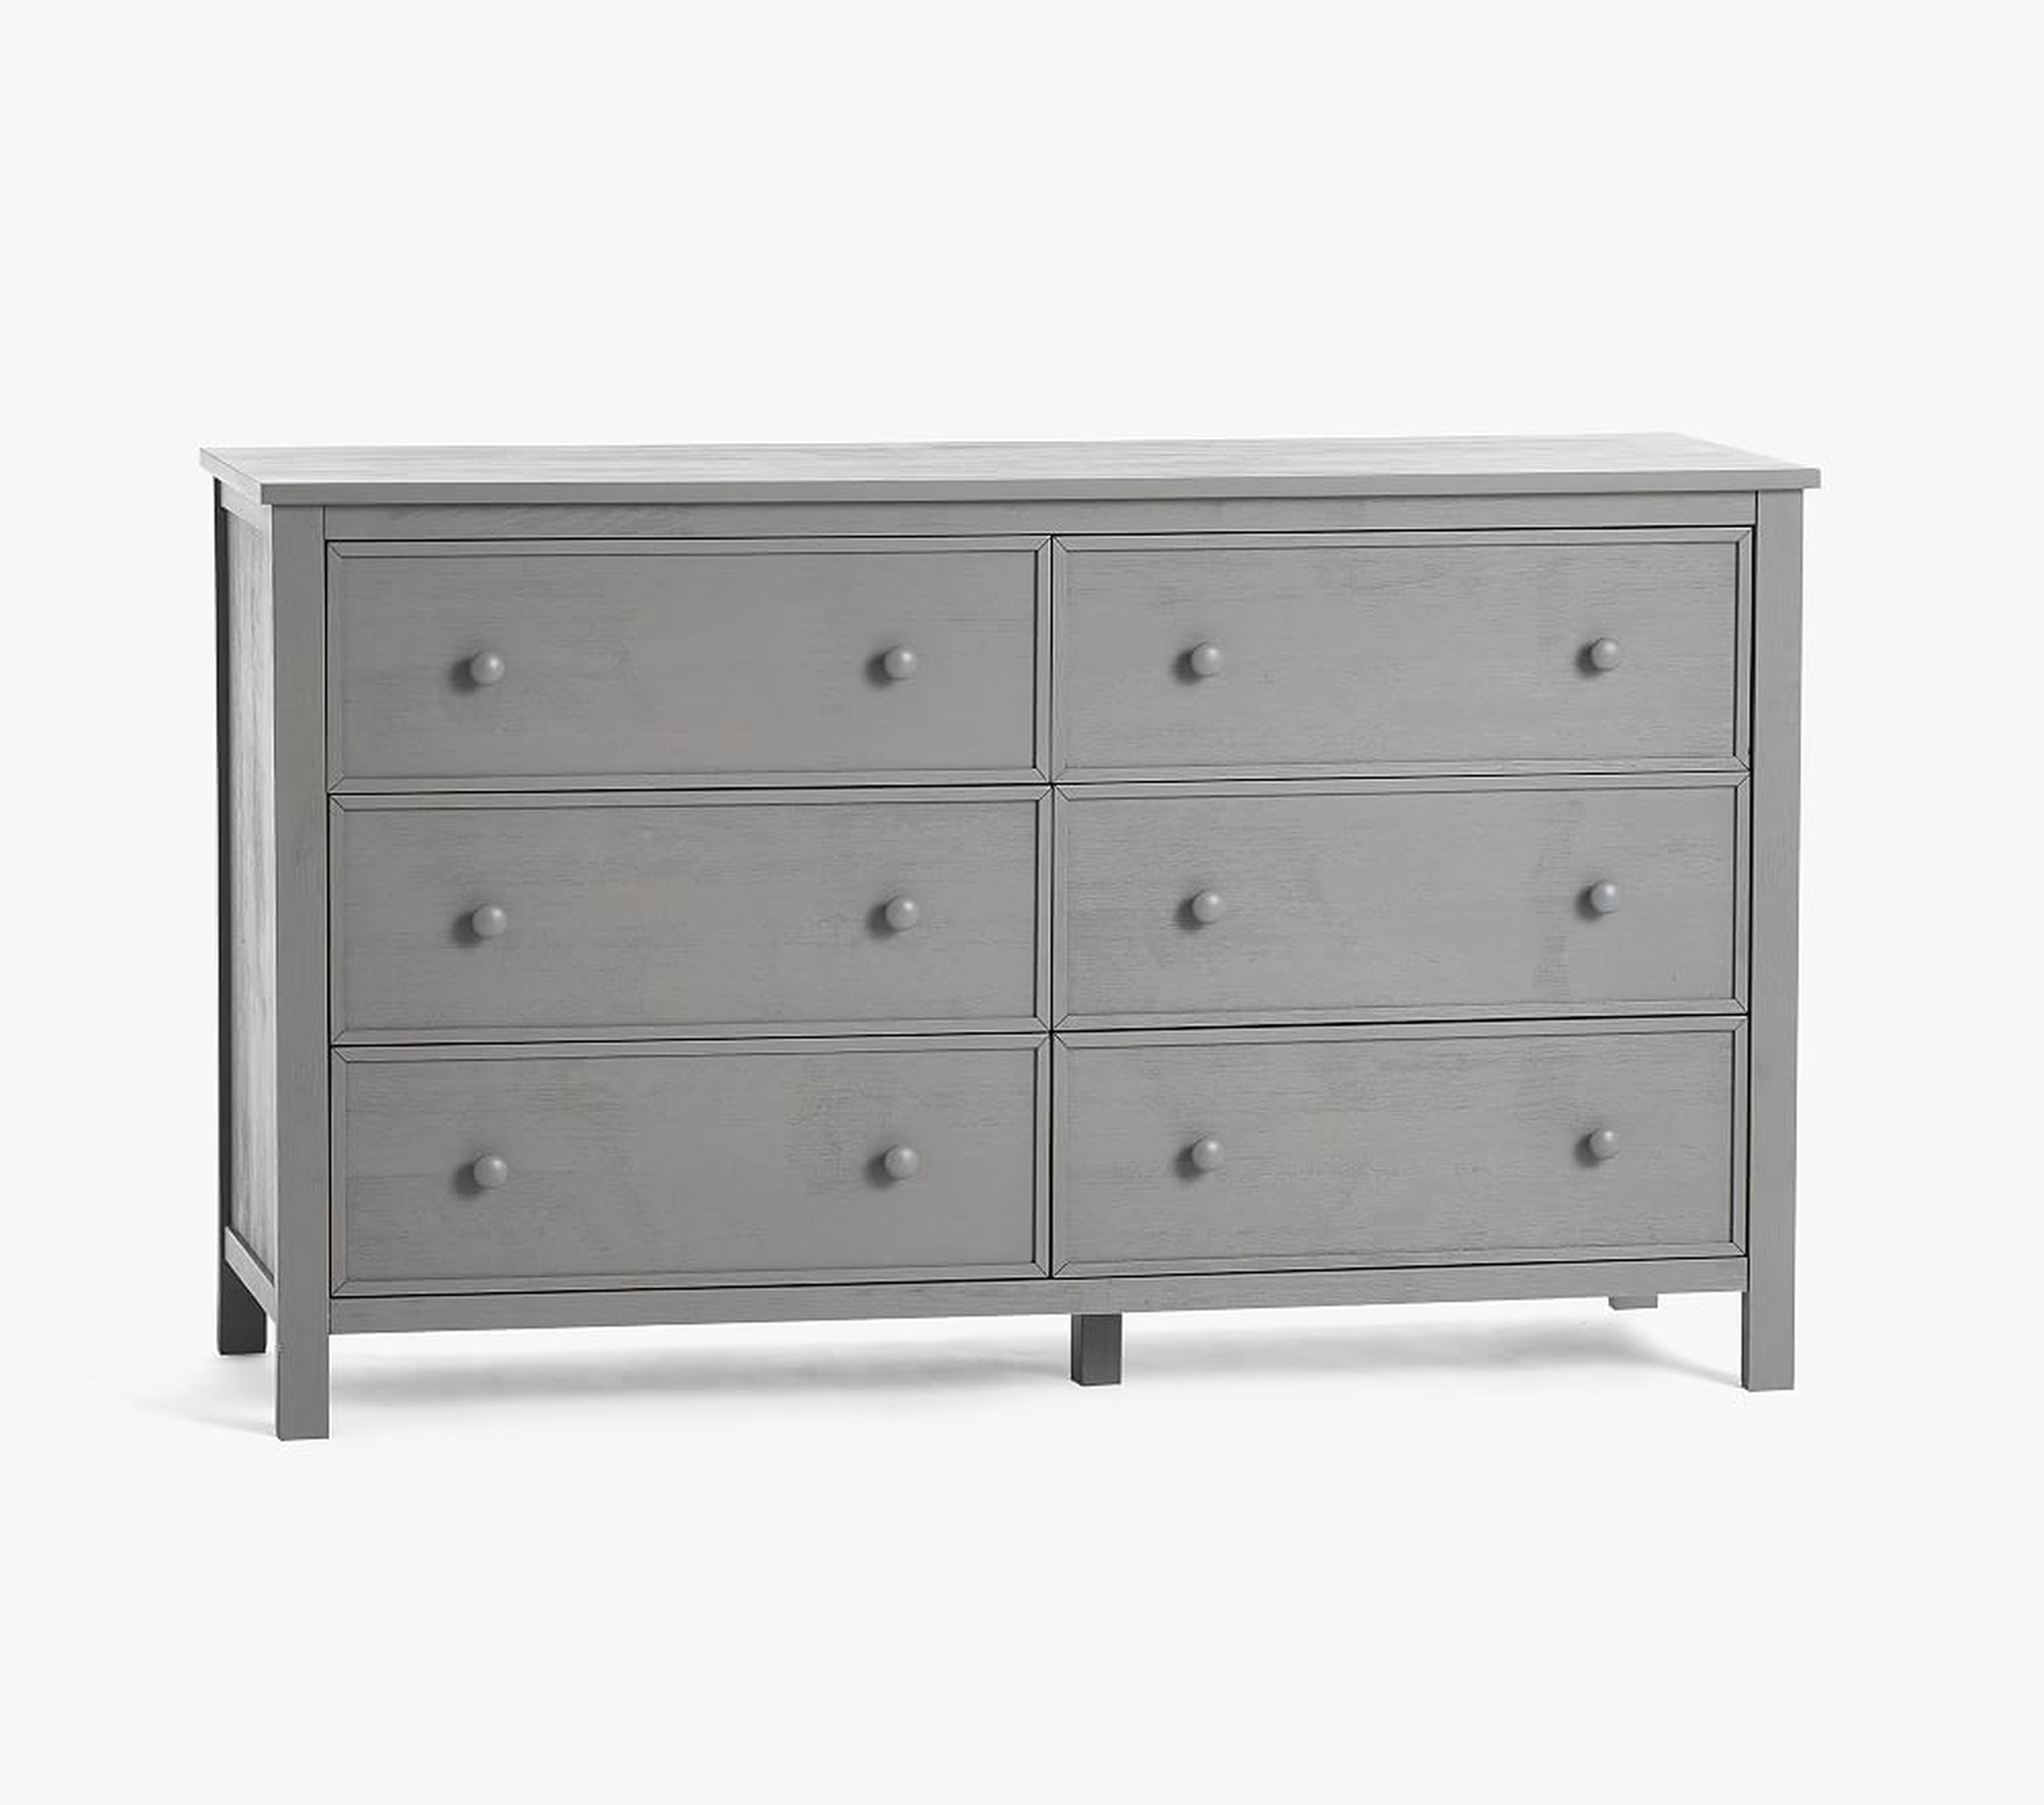 Austen Extra-Wide Dresser, Antiqued Charcoal, In-Home Delivery - Pottery Barn Kids